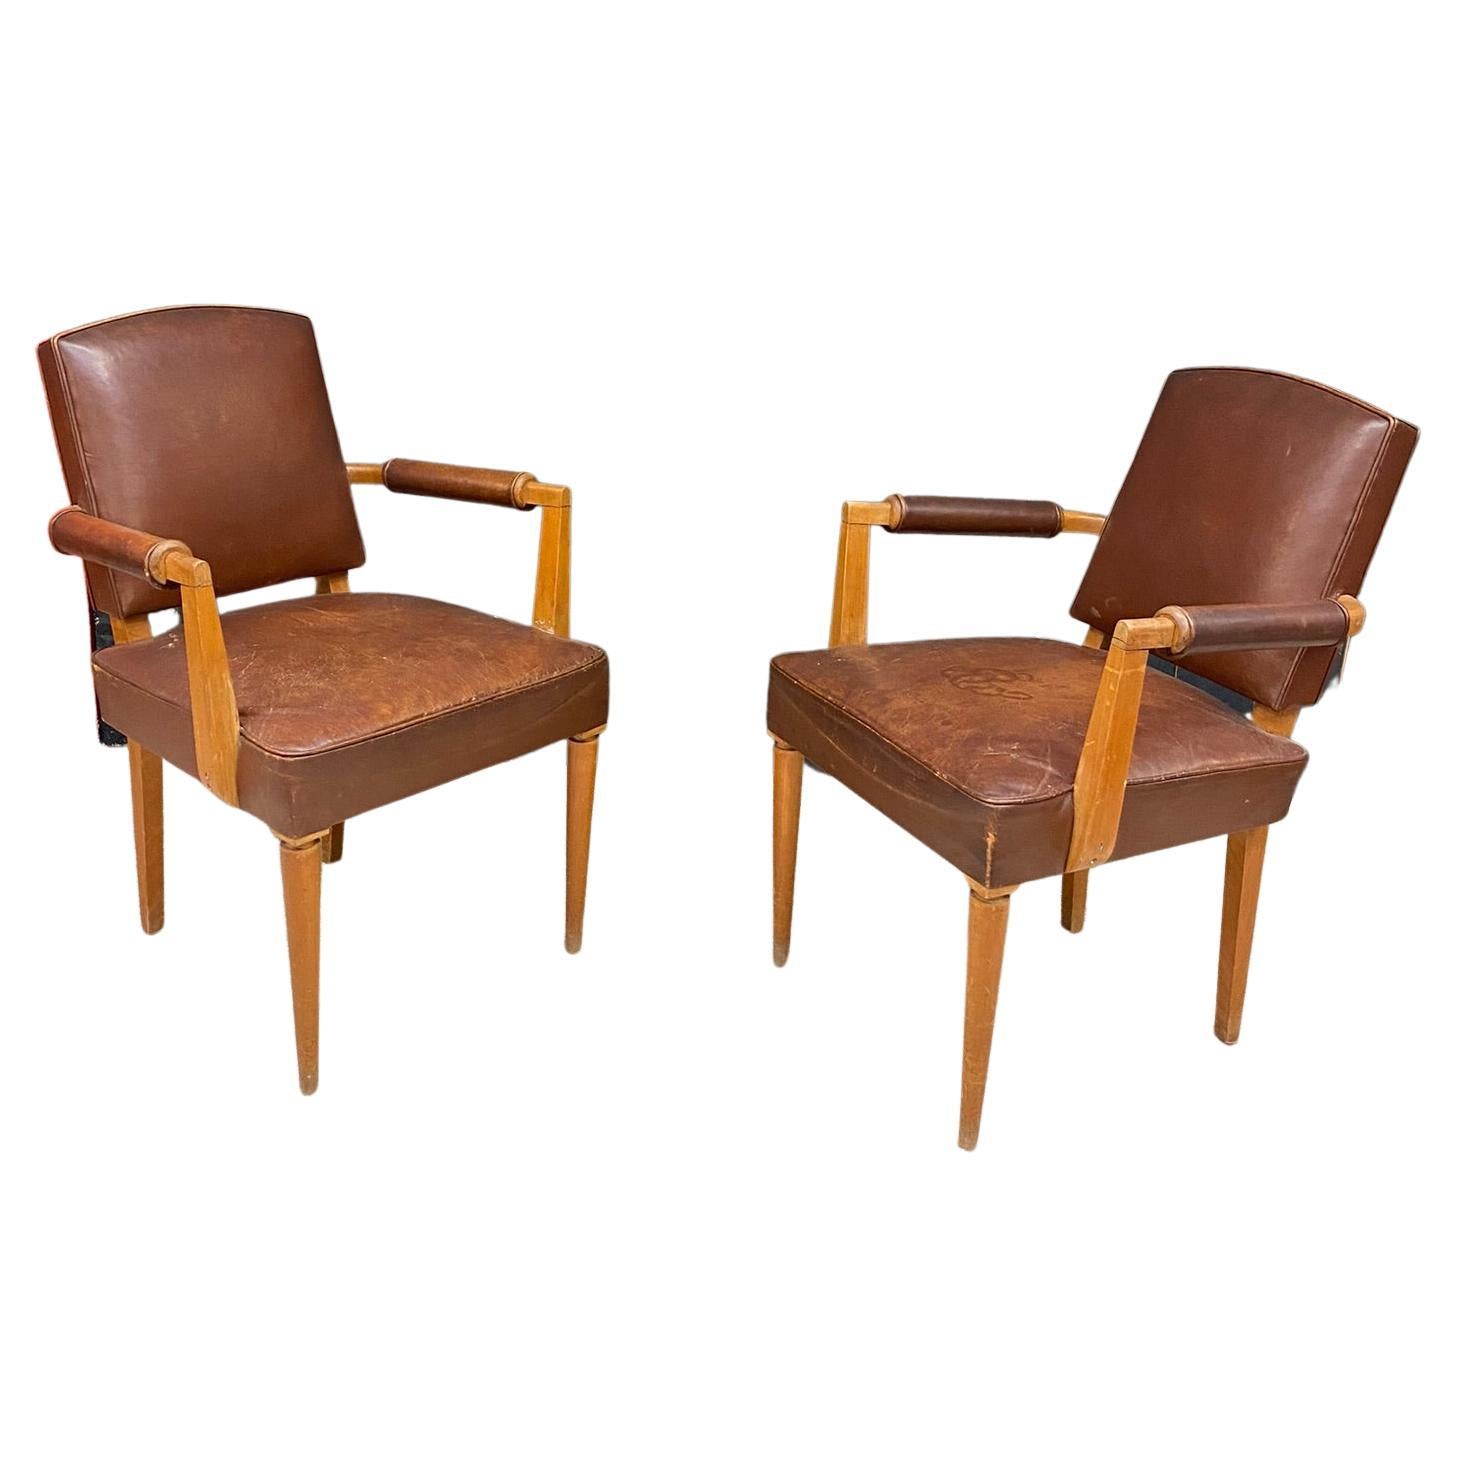 3 art deco armchairs covered in leather, circa 1930 For Sale